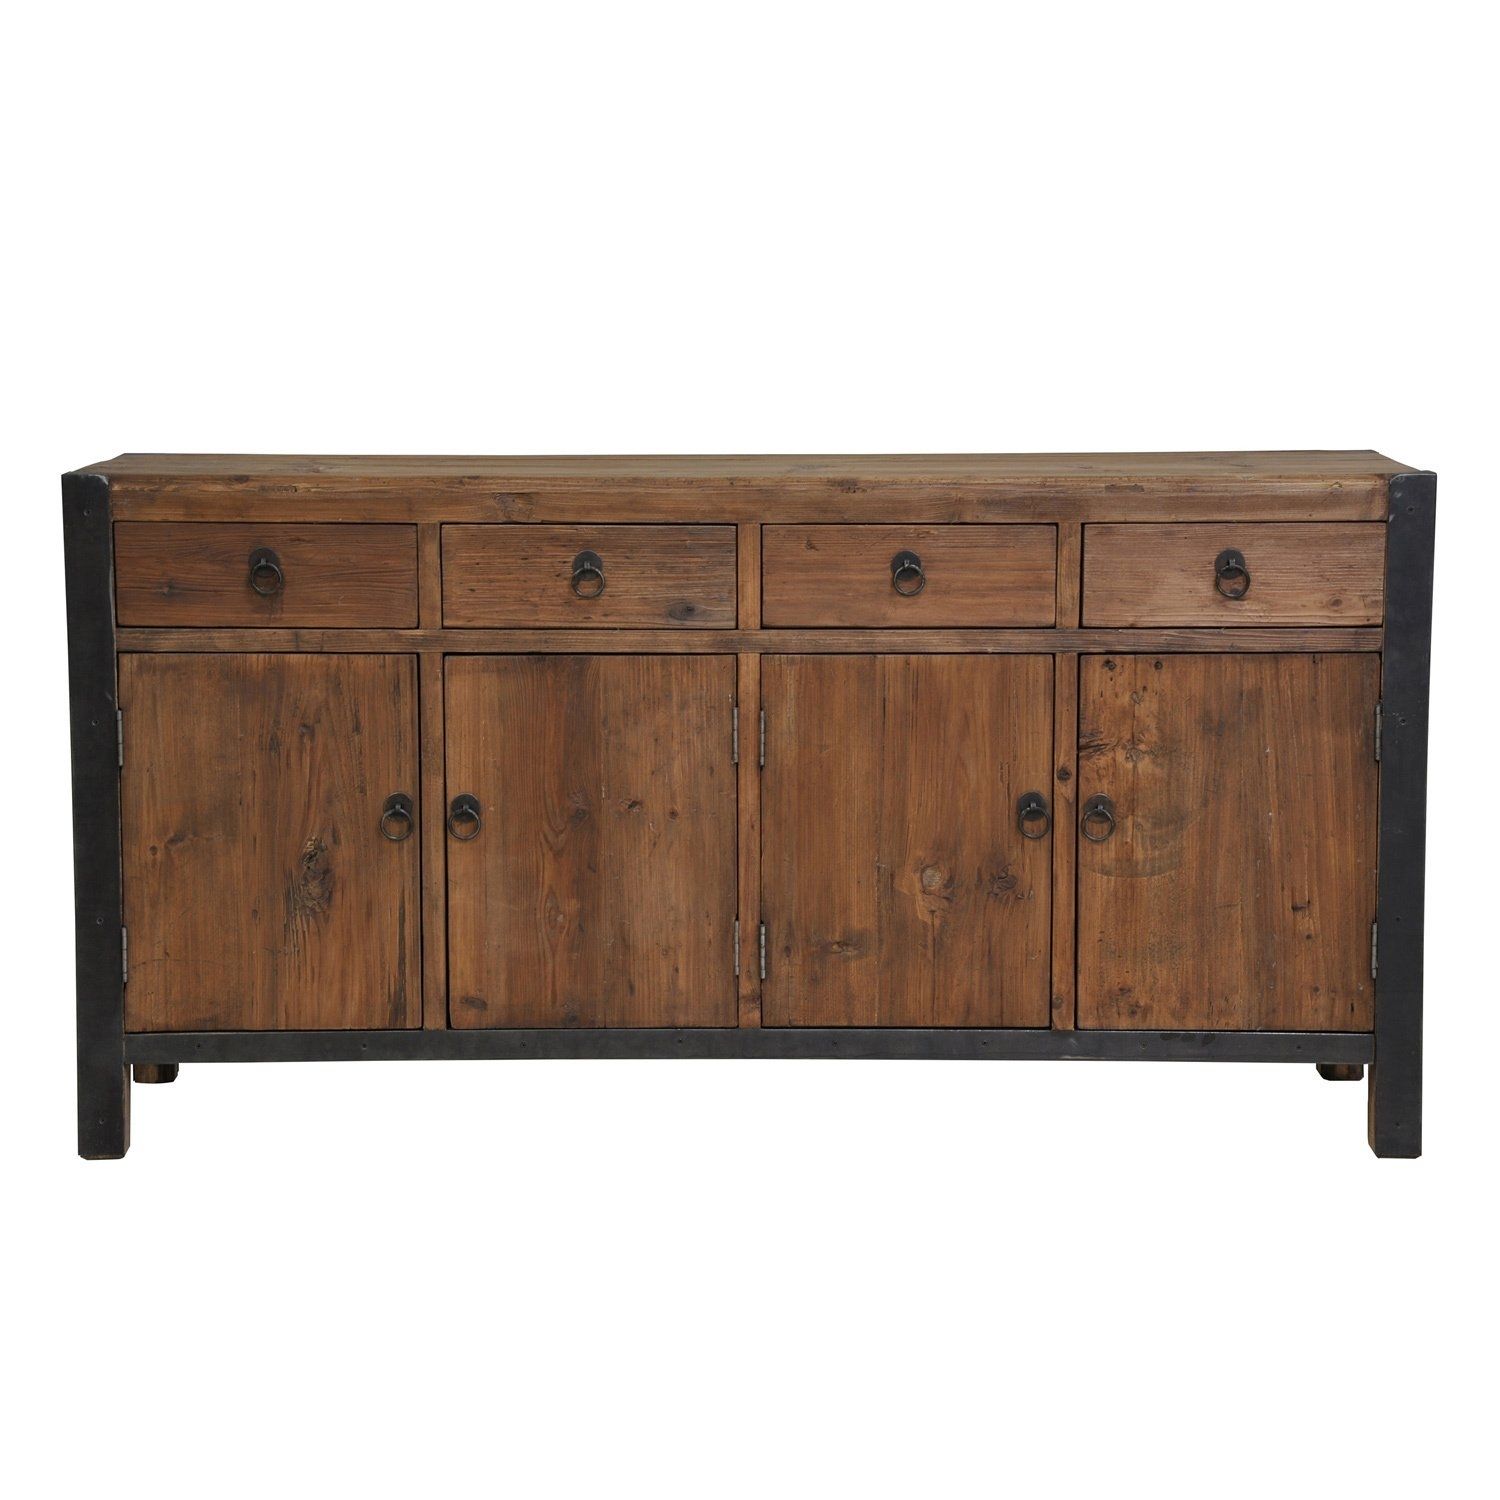 Shop Willow Reclaimed Wood And Iron 70 Inch Buffetkosas Home For Latest Reclaimed Pine &amp; Iron 72 Inch Sideboards (View 5 of 20)